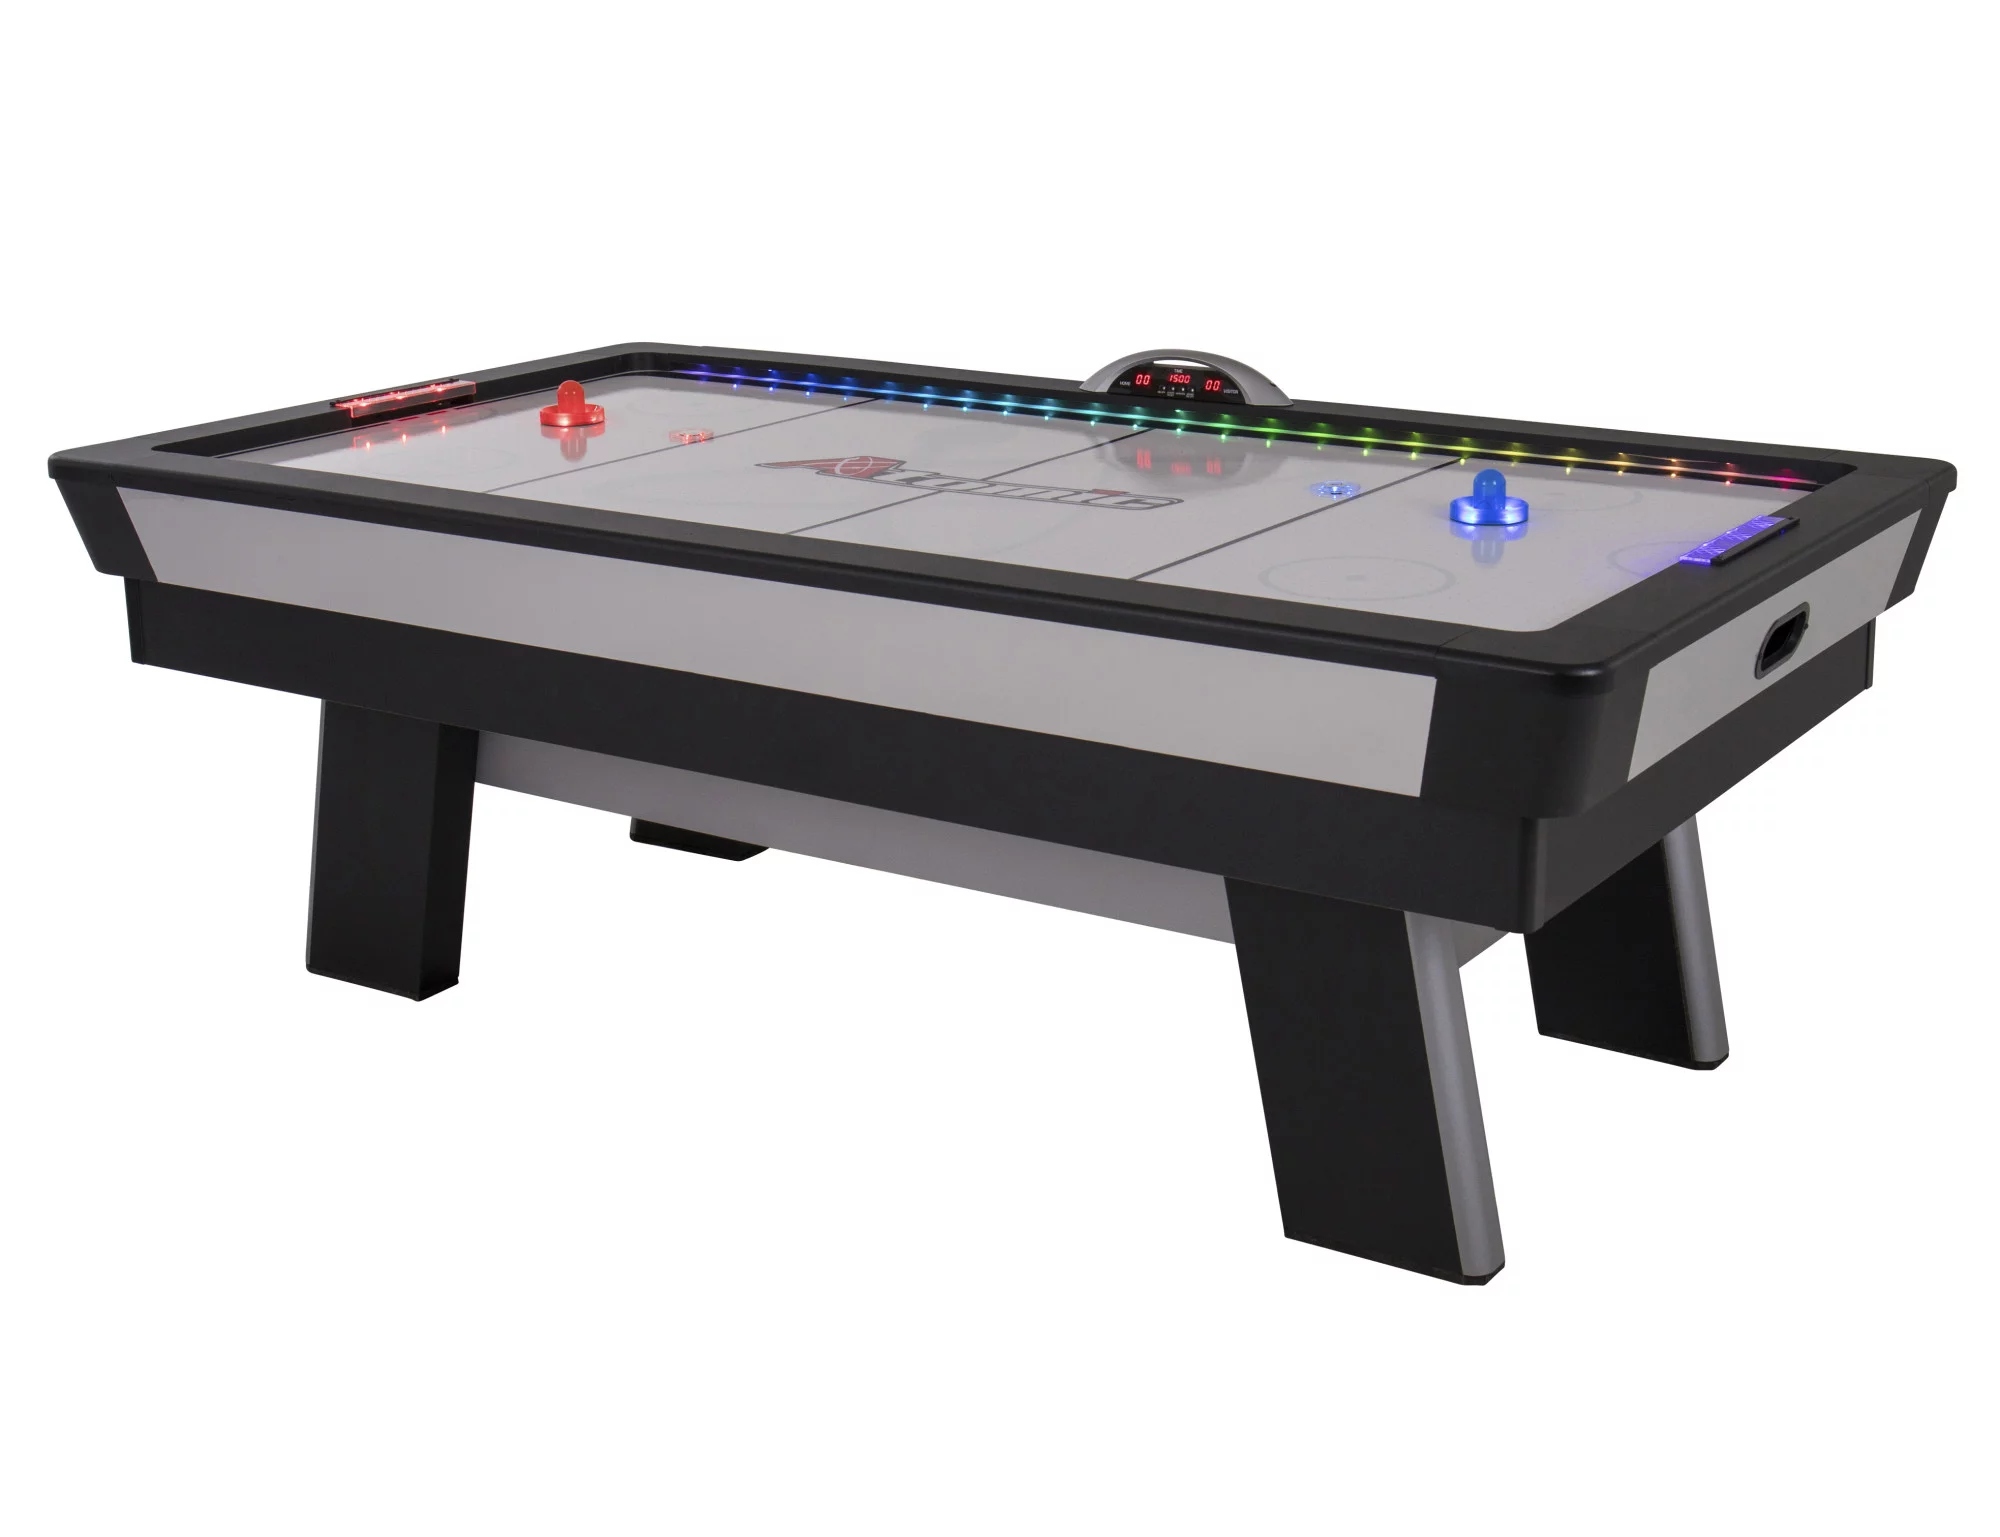 Atomic Top Shelf 7.5 Air Hockey Table - Get Your Game On